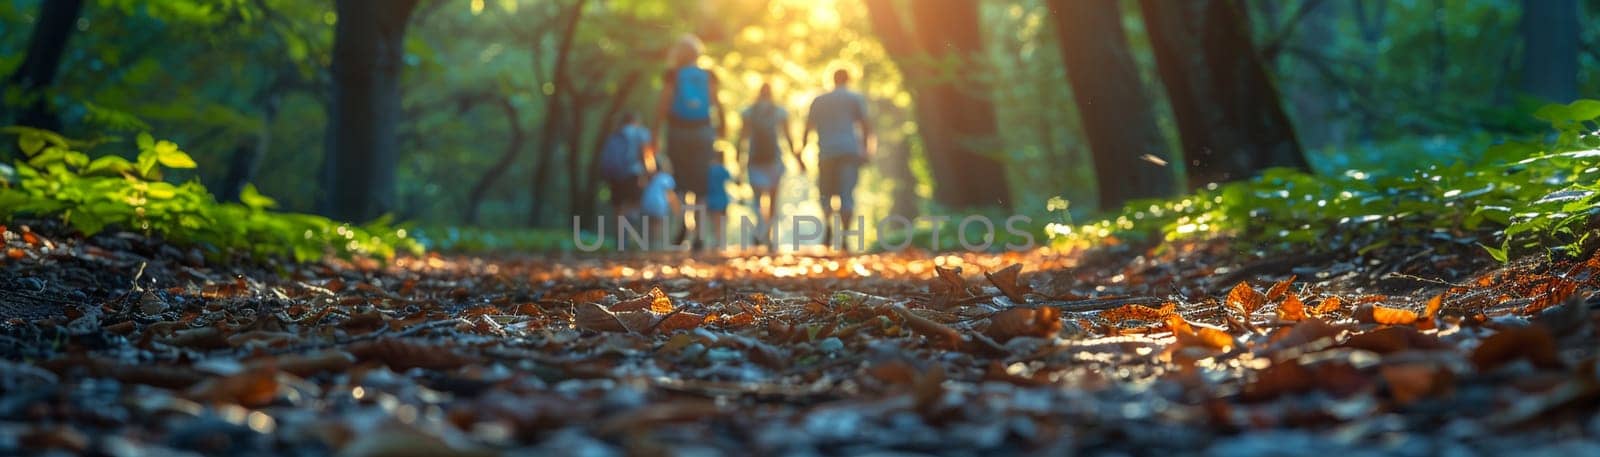 Nature Hiking Trail with Families Enjoying a Weekend Walk, The blur of movement amid greenery suggests the active pursuit of outdoor recreation.